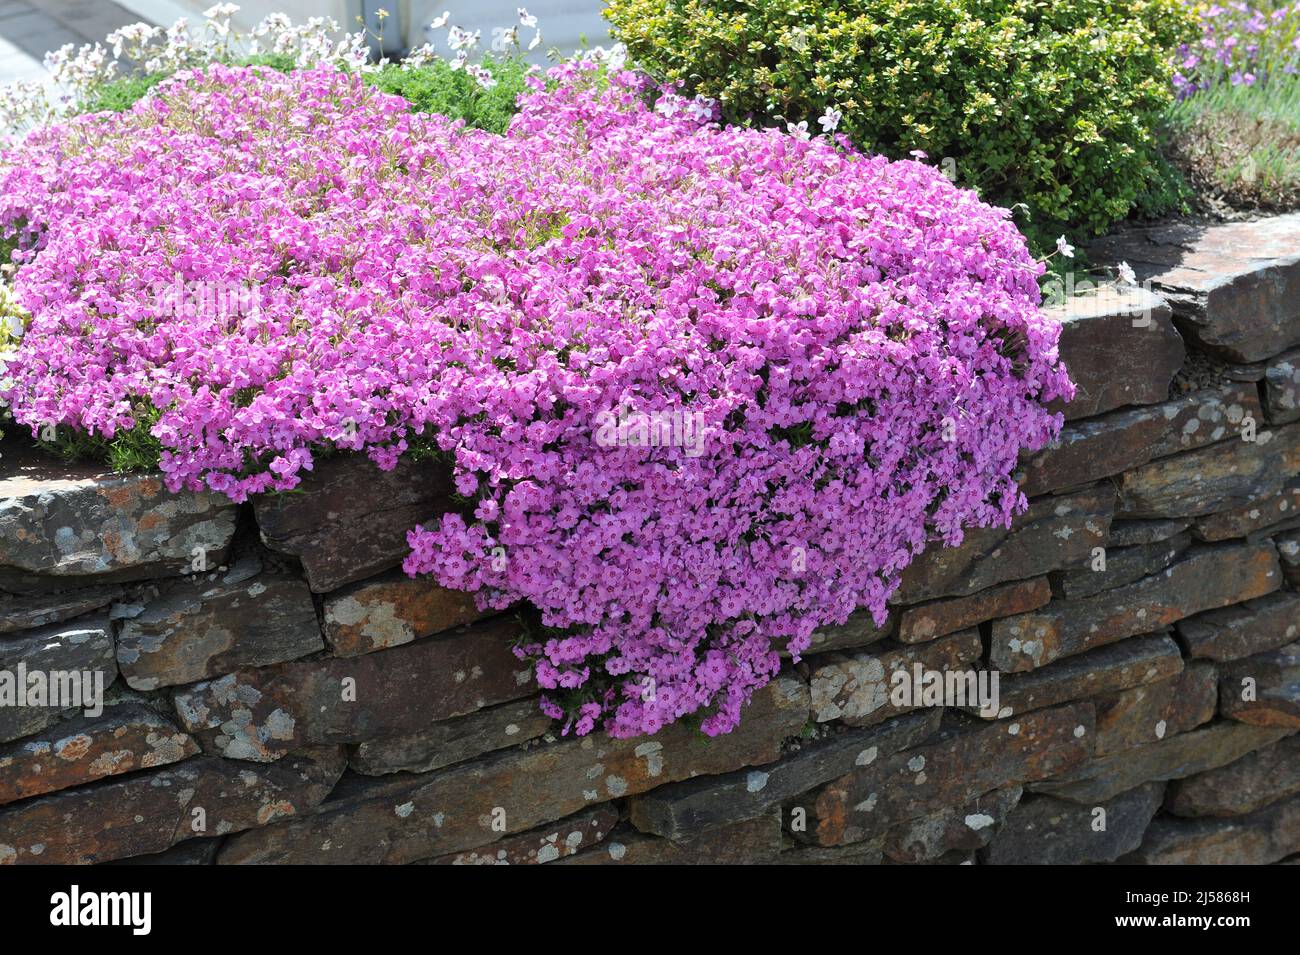 Pink moss phlox (Phlox subulata) Holly bloom on a stone wall in a garden in May Stock Photo